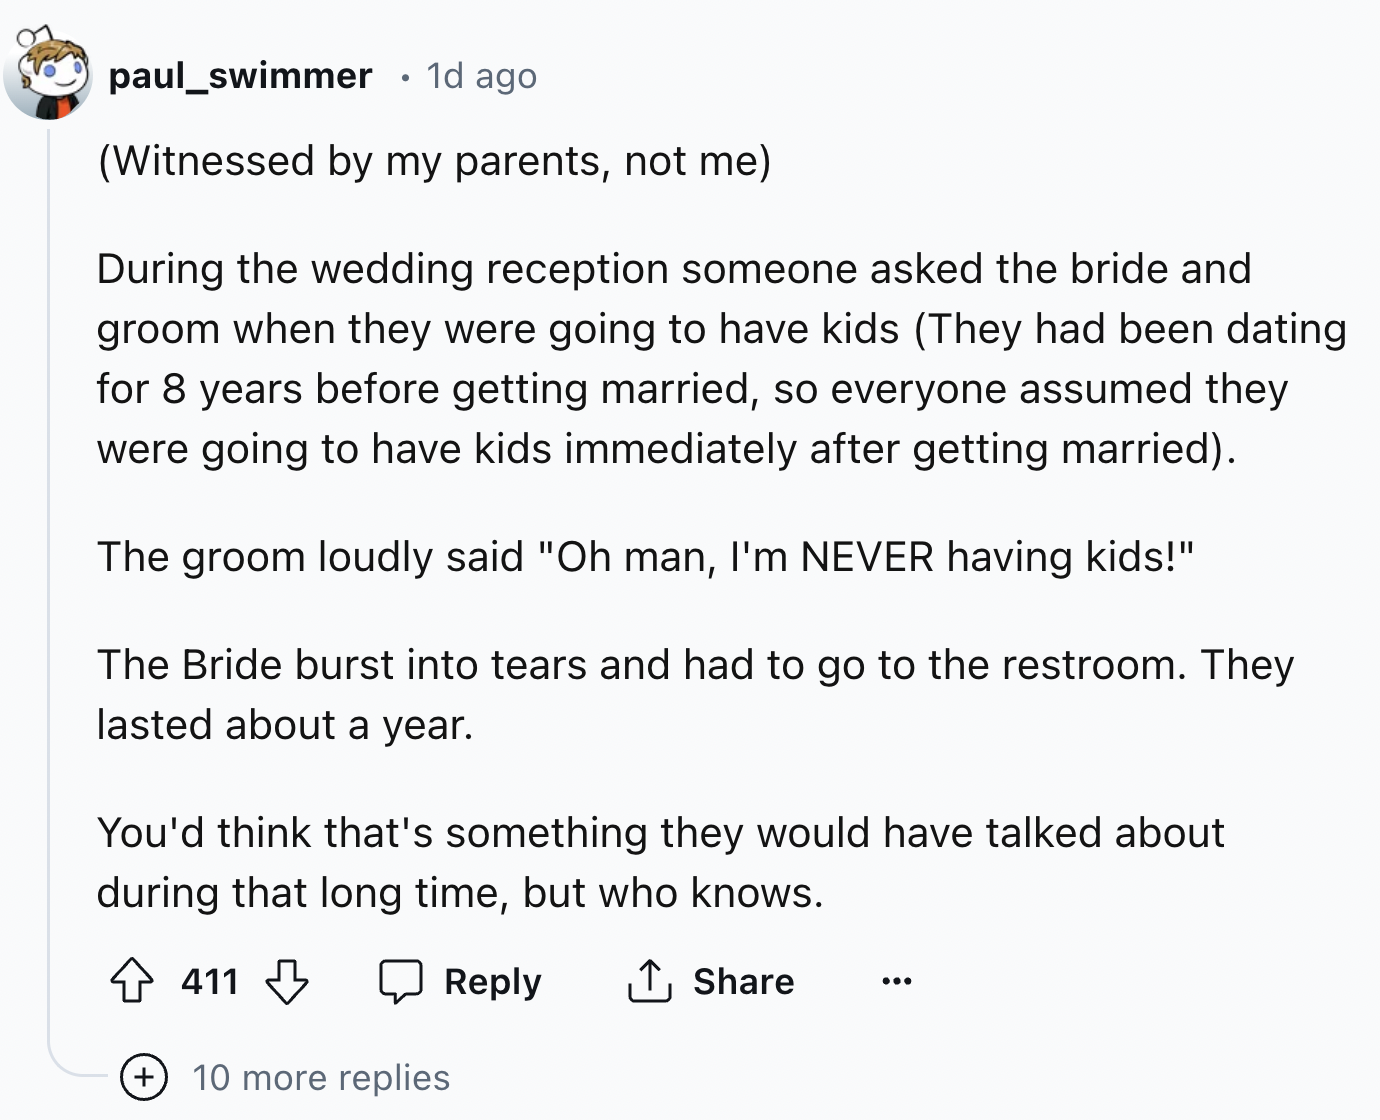 screenshot - paul_swimmer . 1d ago Witnessed by my parents, not me During the wedding reception someone asked the bride and groom when they were going to have kids They had been dating for 8 years before getting married, so everyone assumed they were goin